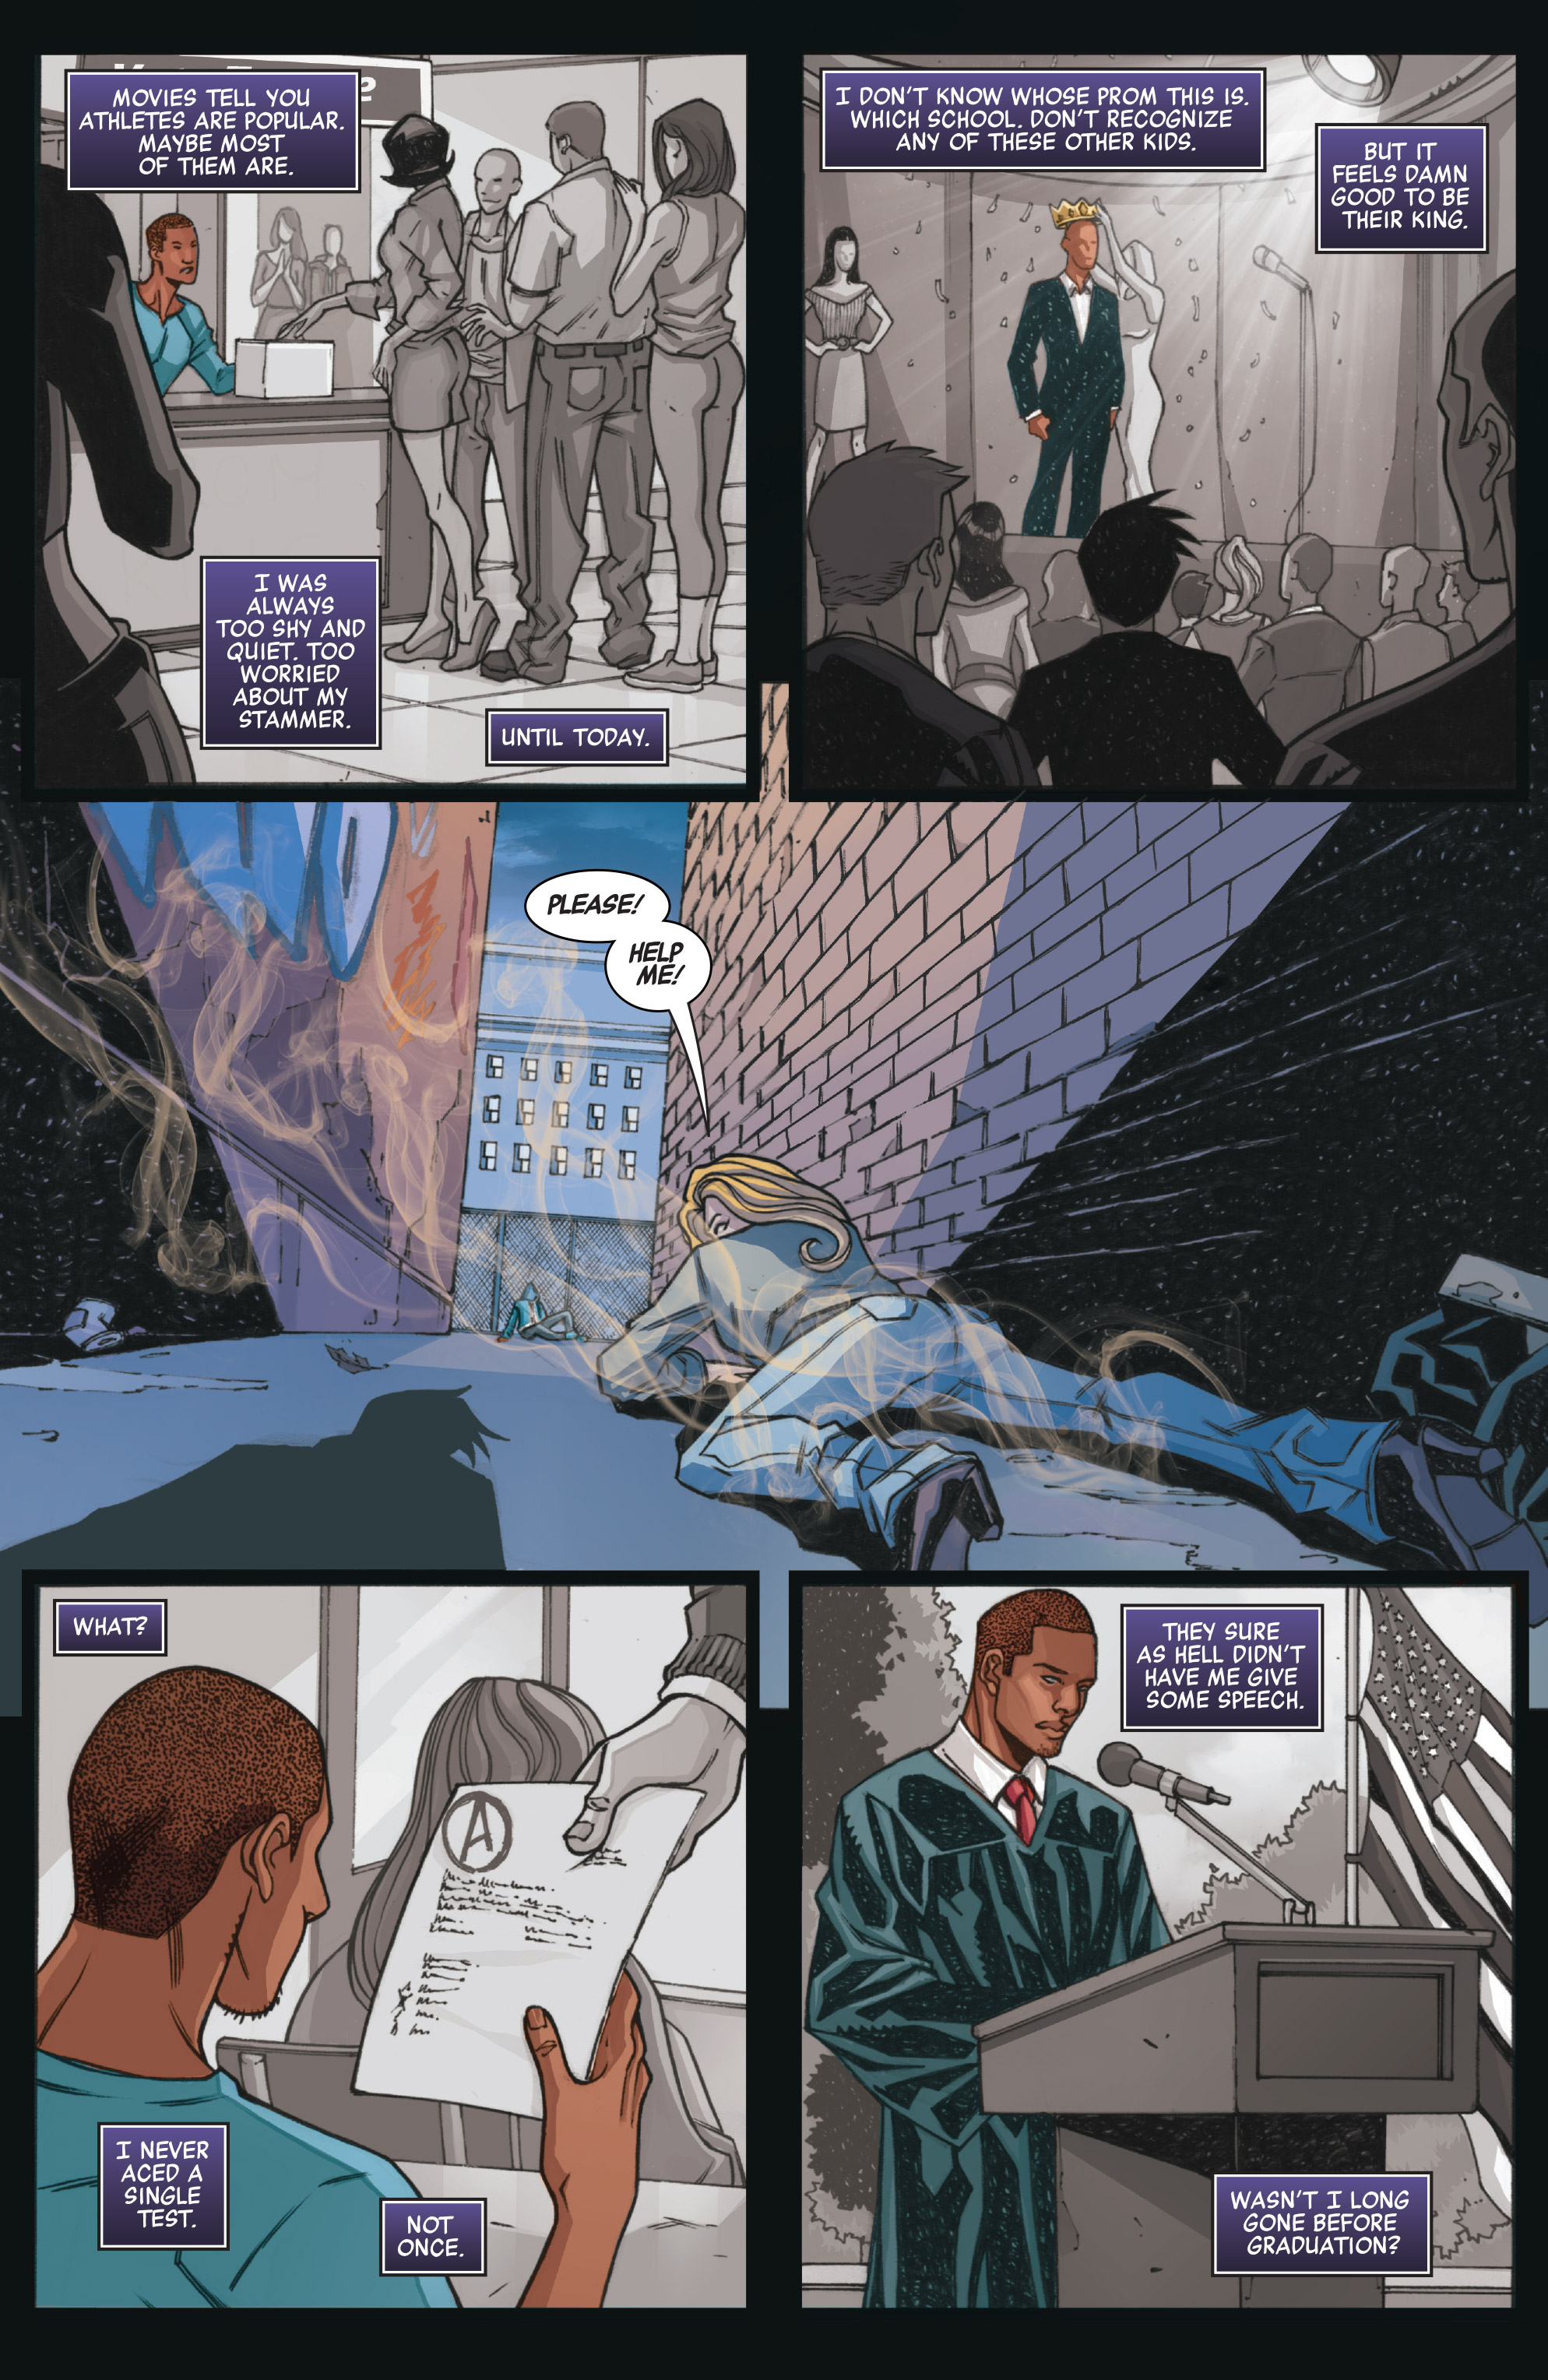 Cloak and Dagger (2018-): Chapter 3 - Page 4